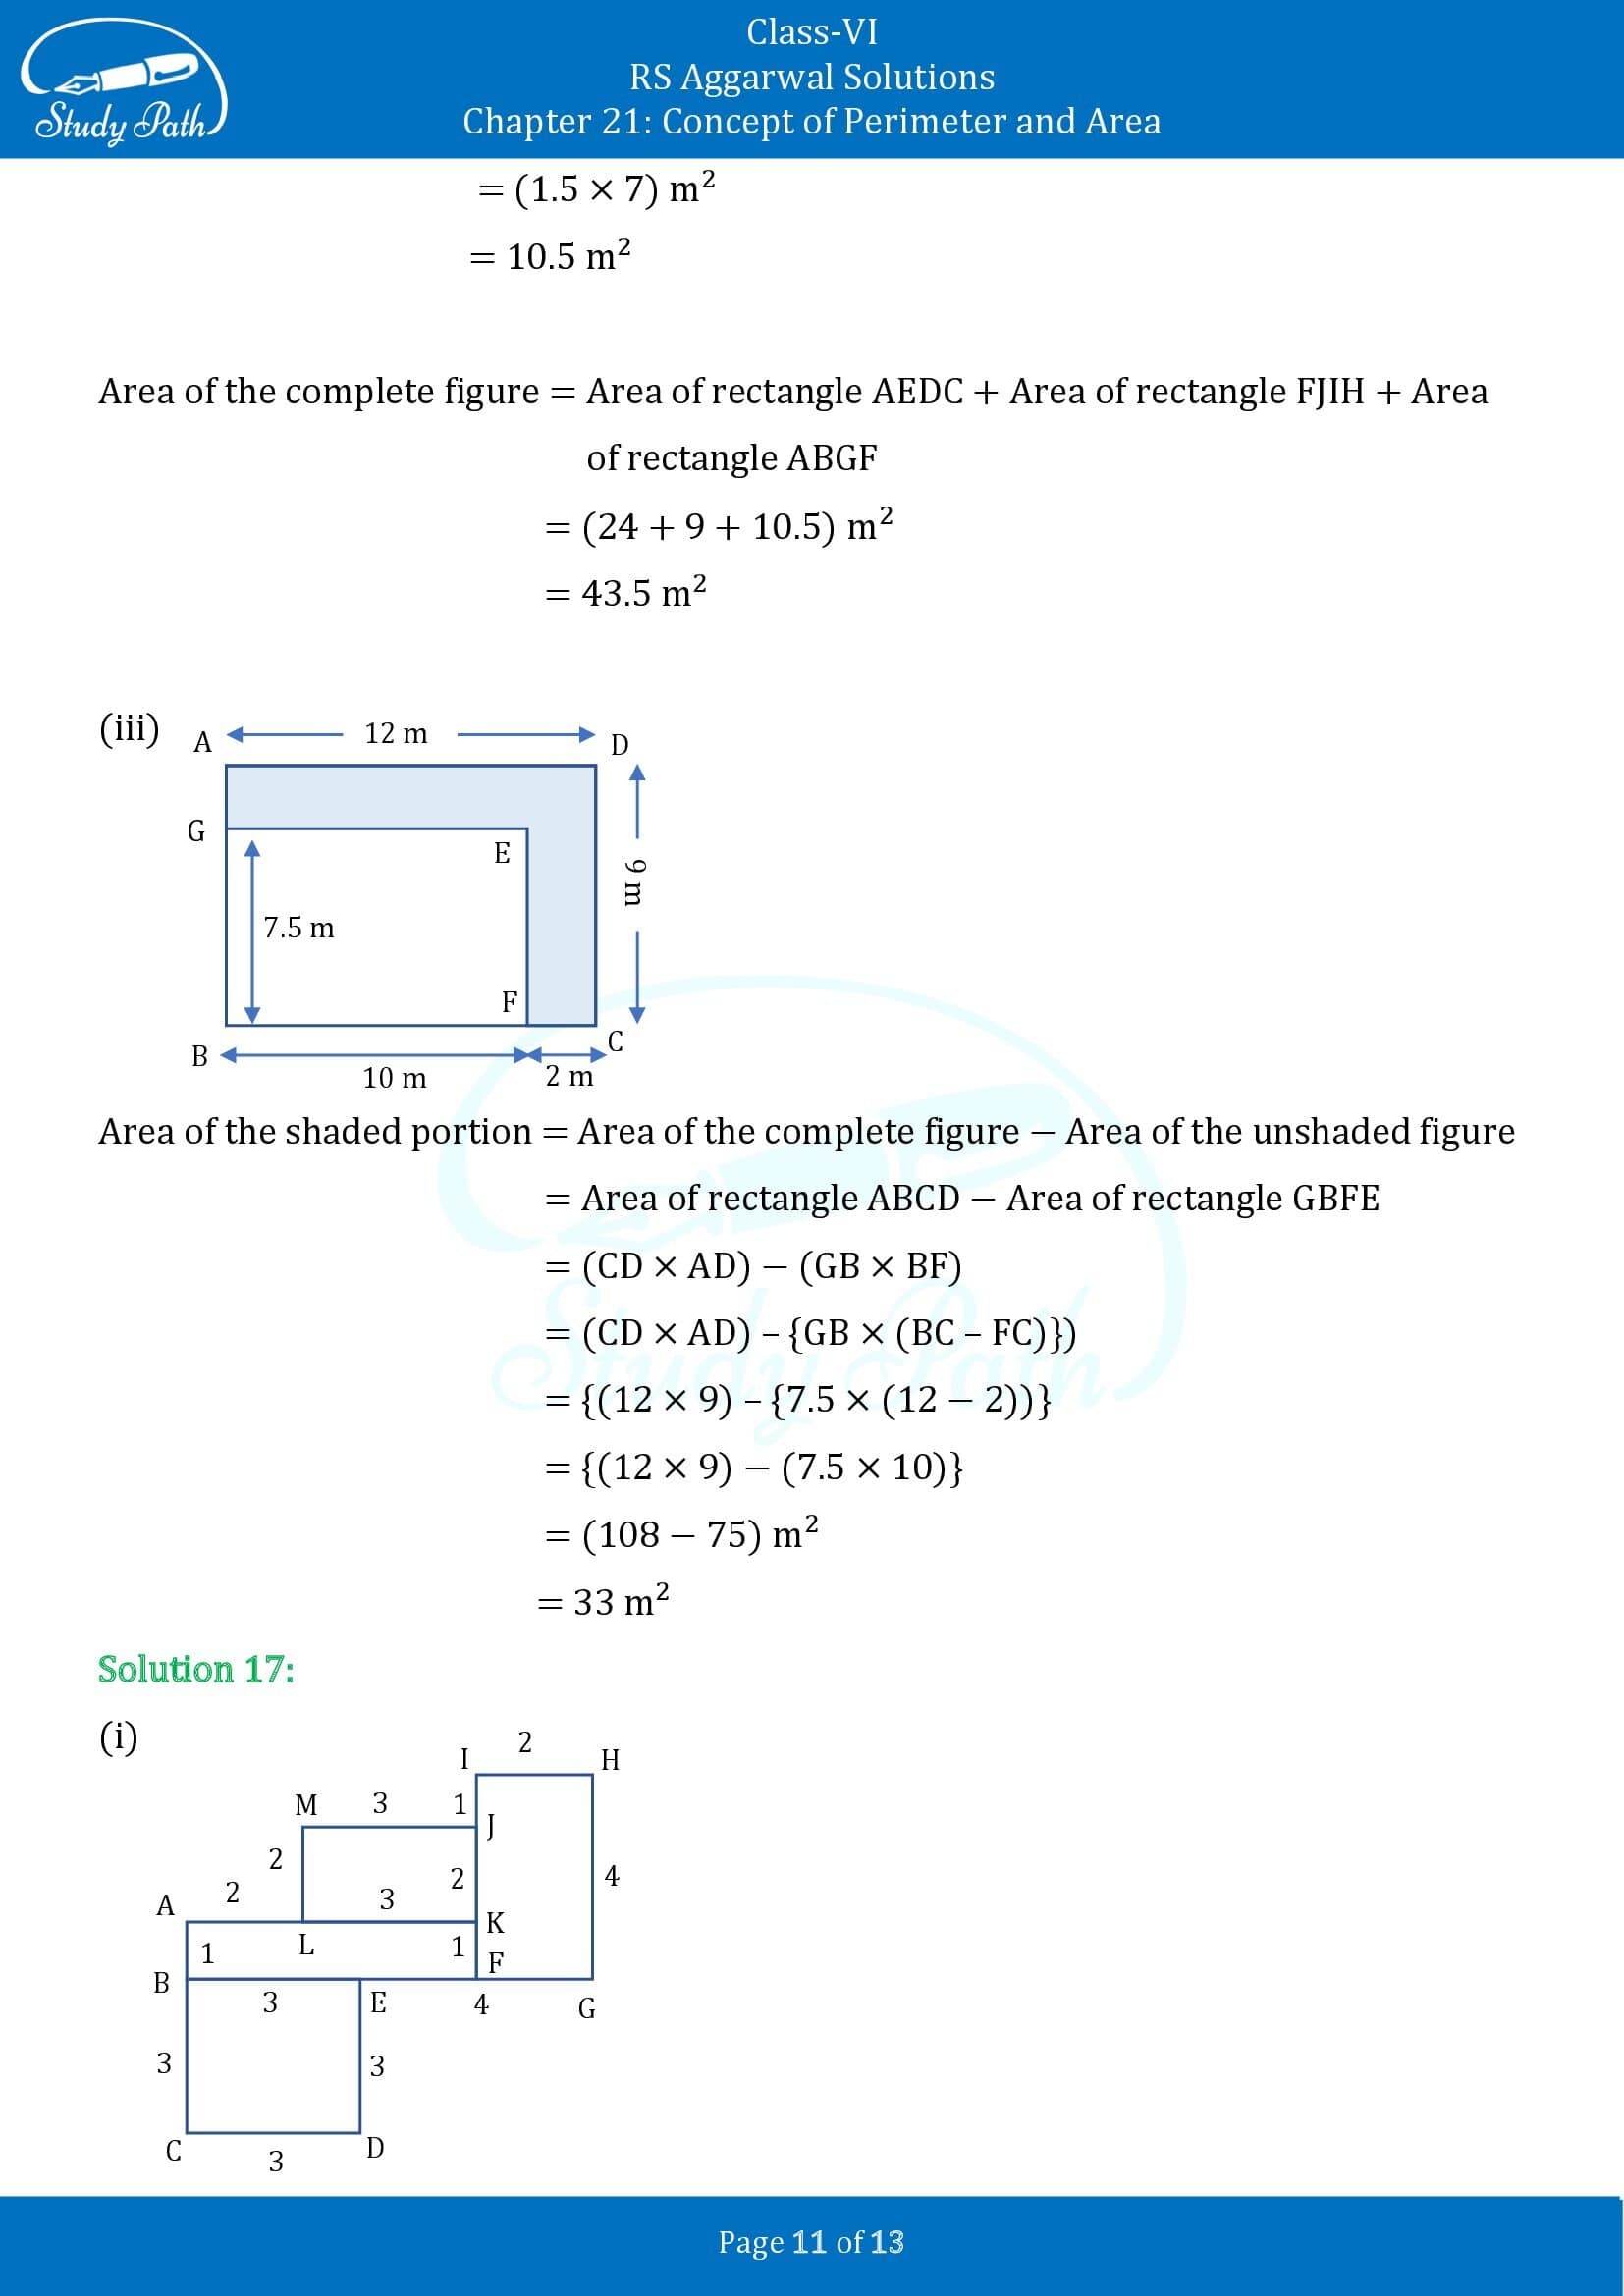 RS Aggarwal Solutions Class 6 Chapter 21 Concept of Perimeter and Area Exercise 21D 00011